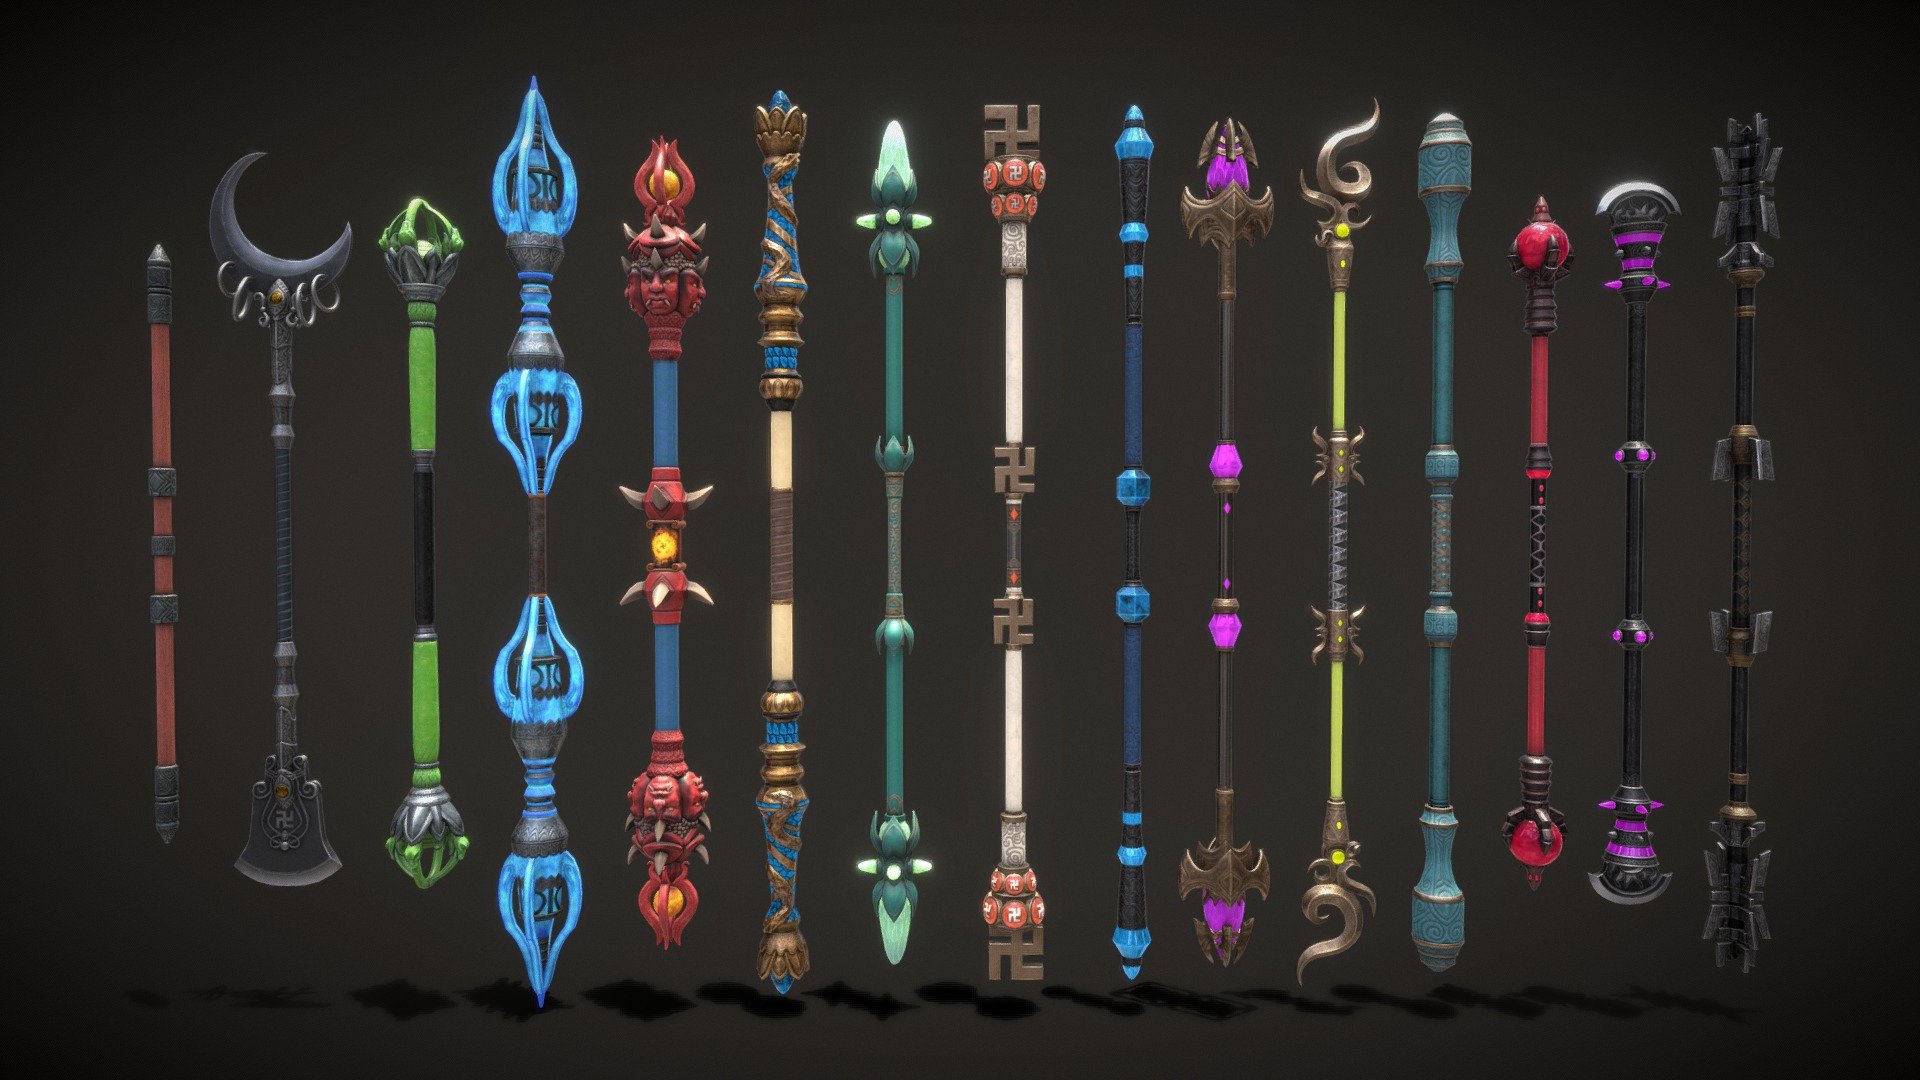 A set of quality staff models. Consists of 15 original objects. Each staff has a PBR texture with a resolution of 2048x2048.

Total polygons (triangles) 78652 

SM_Staff_indian_set04_01 - 1176 

SM_Staff_indian_set04_02 - 5976 

SM_Staff_indian_set04_03 - 7624 

SM_Staff_indian_set04_04 - 5520 

SM_Staff_indian_set04_05 - 12816

SM_Staff_indian_set04_06 - 5240 

SM_Staff_indian_set04_07 - 5872 

SM_Staff_indian_set04_08 - 5560 

SM_Staff_indian_set04_09 - 2360 

SM_Staff_indian_set04_10 - 6128

SM_Staff_indian_set04_11 - 4084

SM_Staff_indian_set04_12 - 2576

SM_Staff_indian_set04_13 - 4208

SM_Staff_indian_set04_14 - 4880

SM_Staff_indian_set04_15 - 4632

Archives with textures contain:

PNG textures - base color, metallic, normal, roughness

Texturing Unity (Metallic Smoothness) - AlbedoTransparency, MetallicSmoothness, Normal

Texturing Unreal Engine - BaseColor, Normal, OcclusionRoughnessMetallic - Fantasy Indian Staff Set 04 - 3D model by zilbeerman 3d model